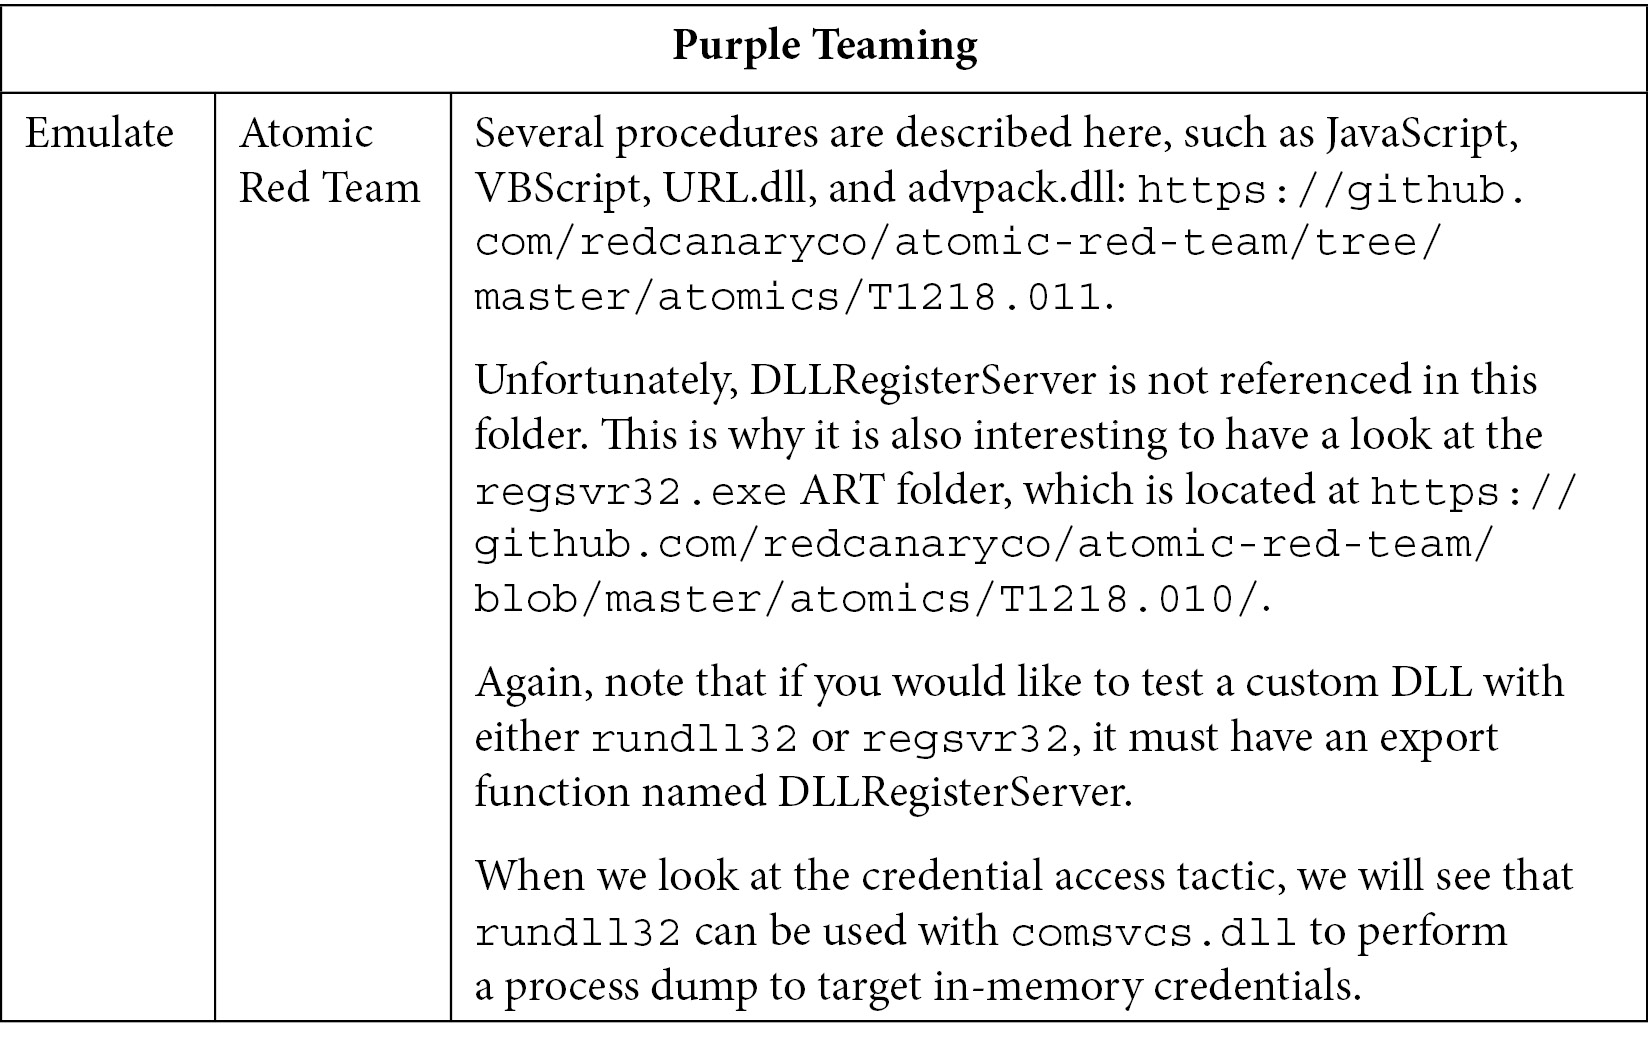 Table 10.9 – Purple Teaming T1218 – Red 
